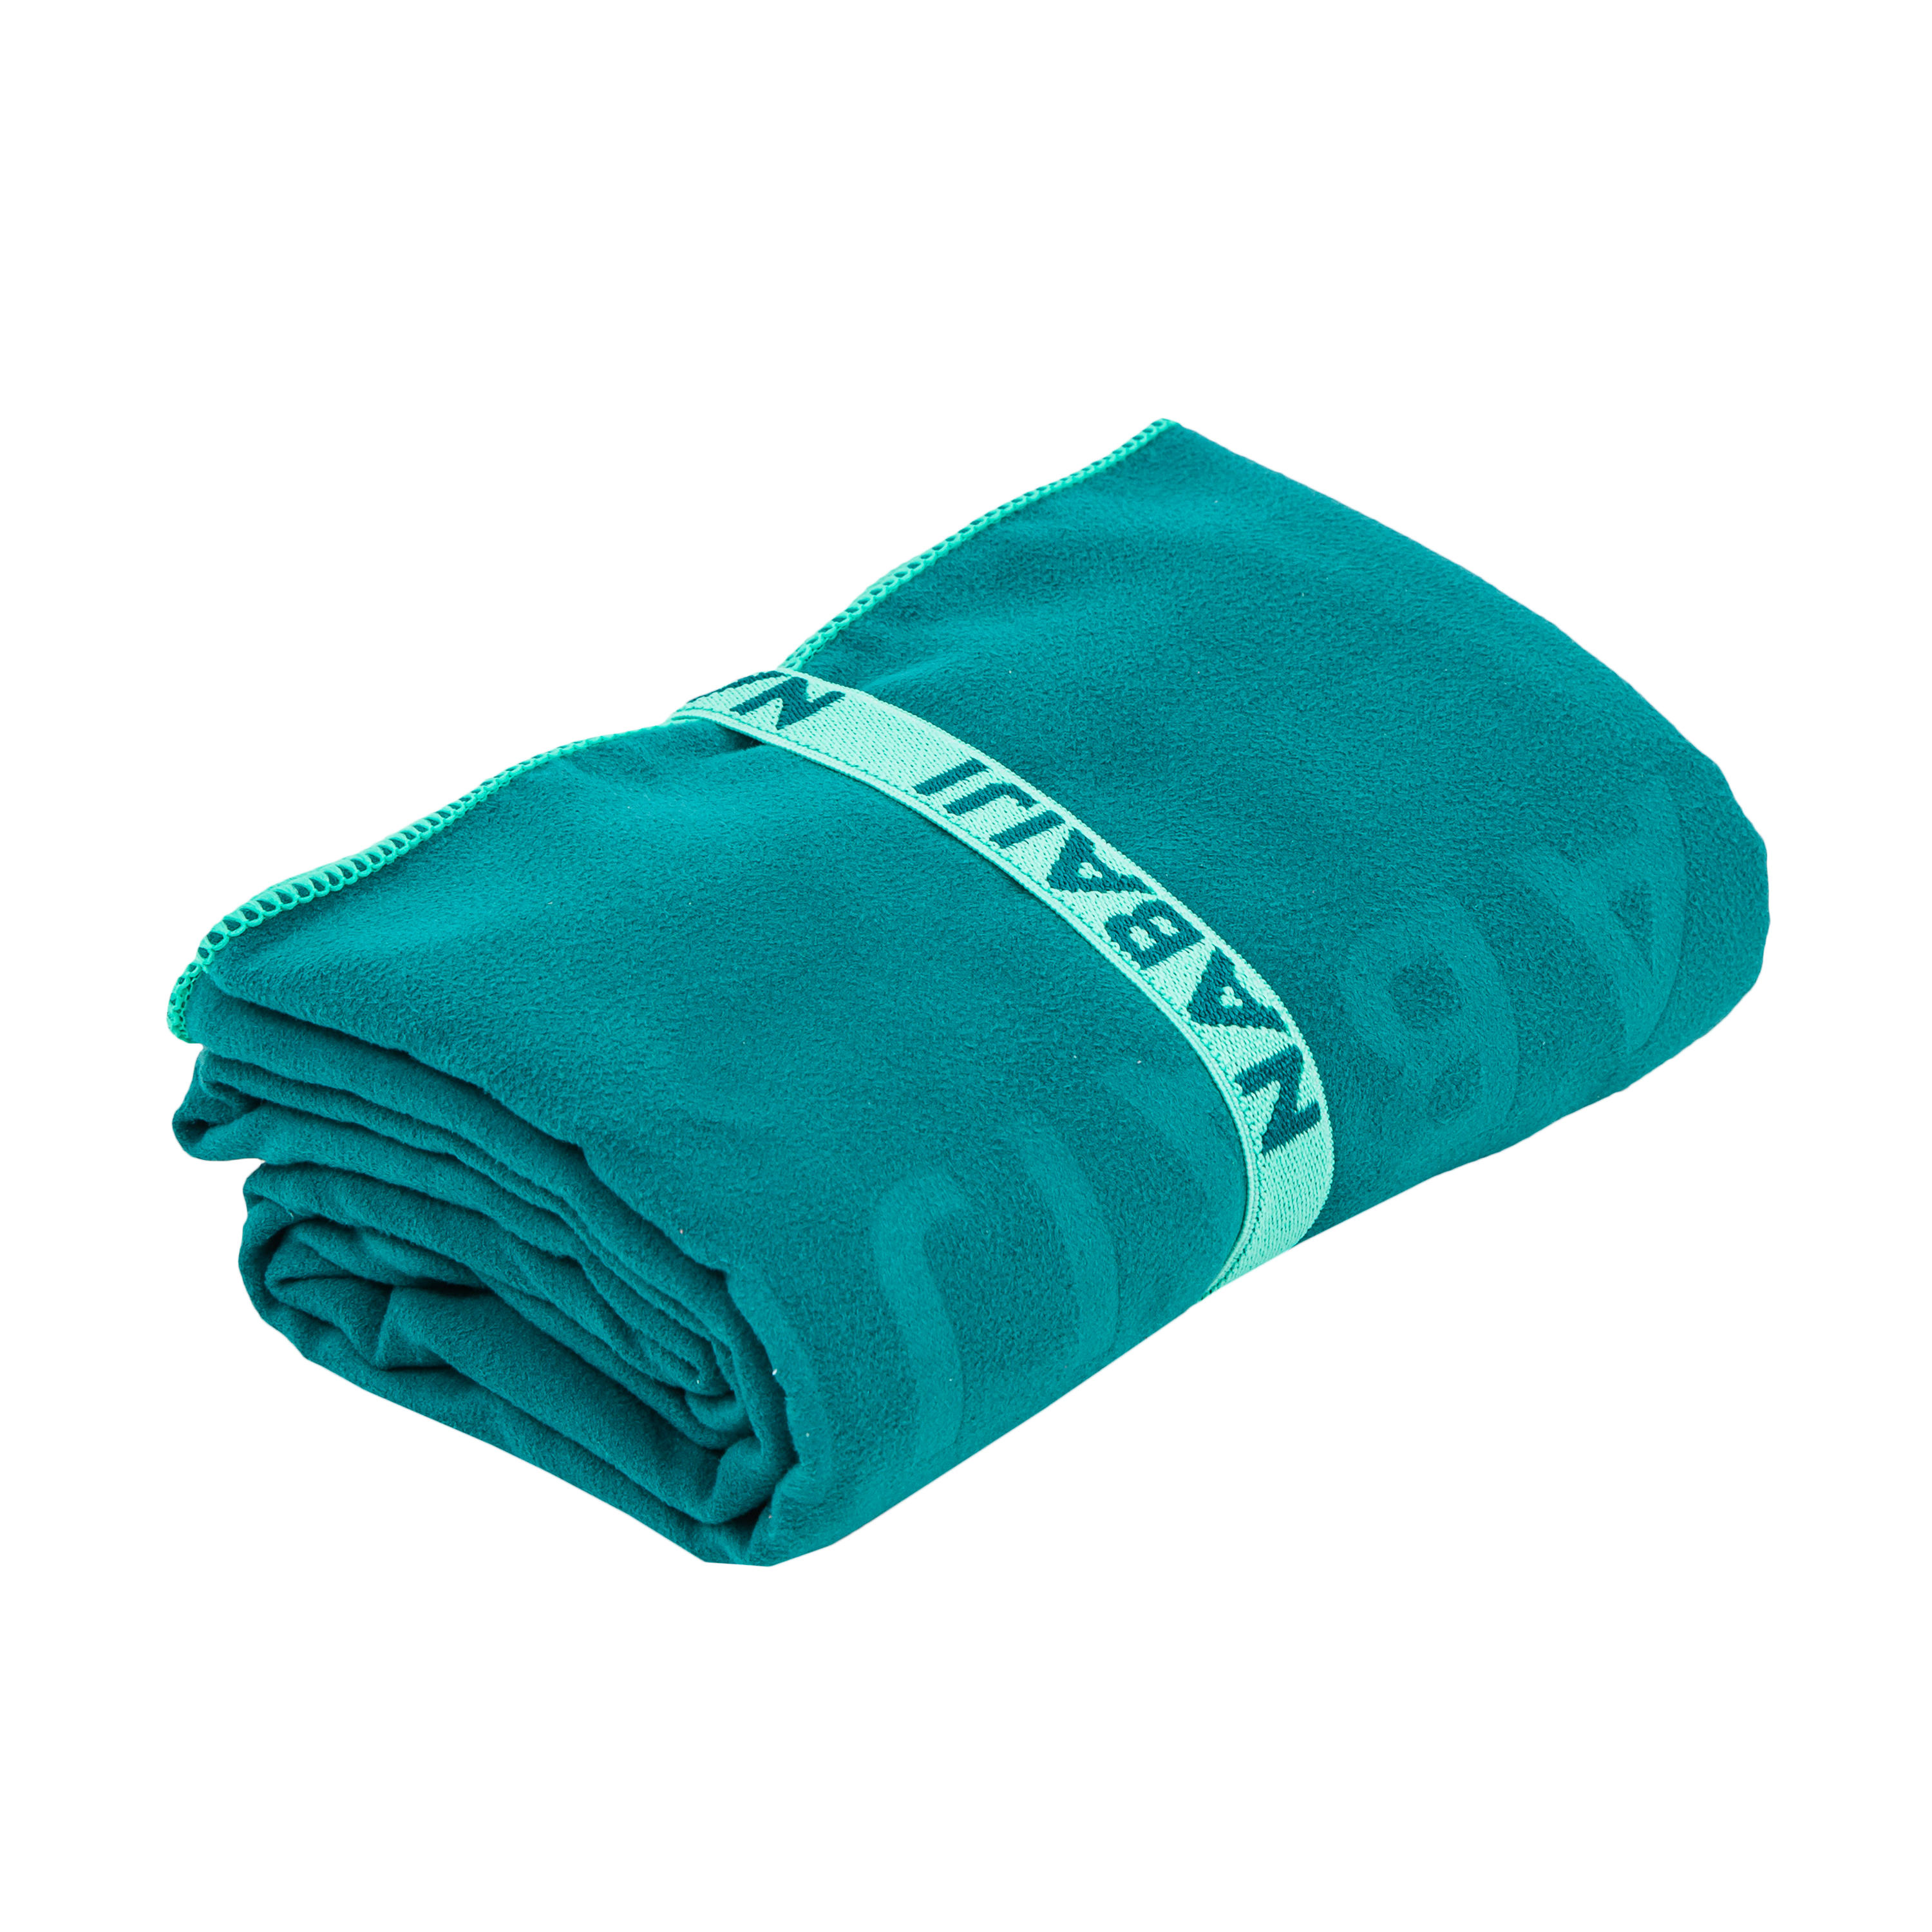 Swimming Microfibre Towel Size XL 110 x 175 cm - Forest Green 3/5